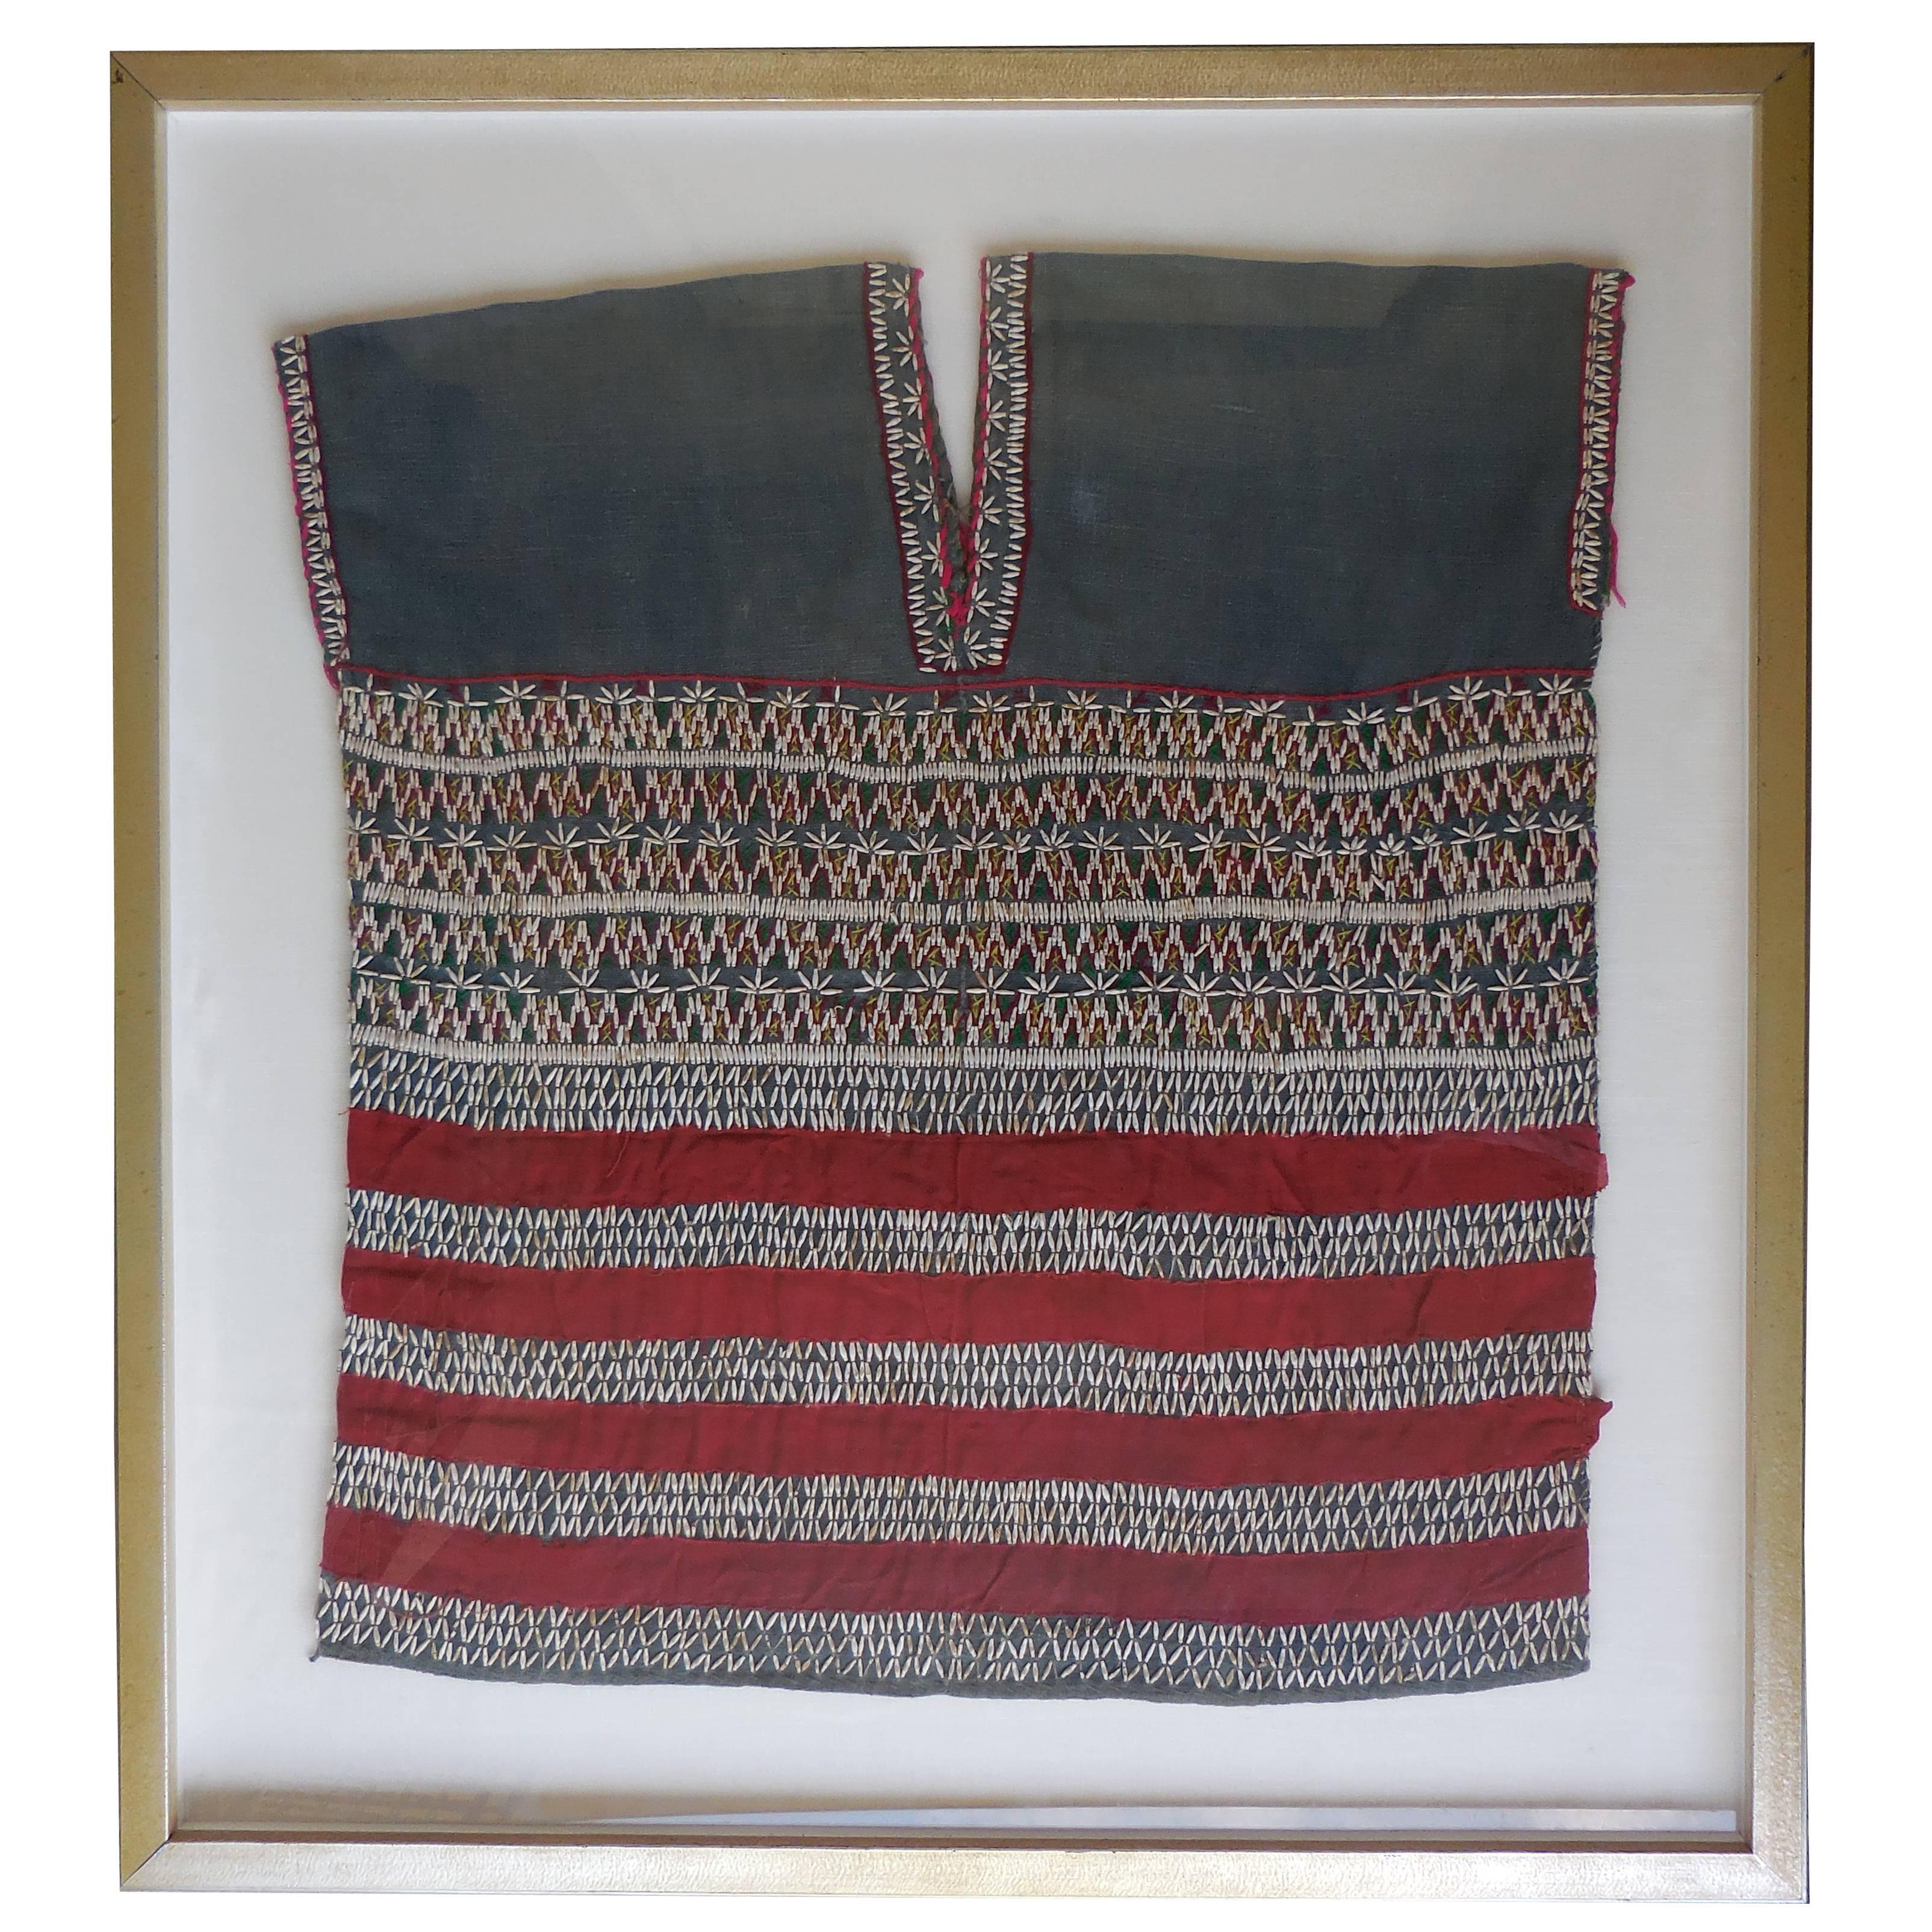 Vintage Hand Weave Tunic in Shadow Box